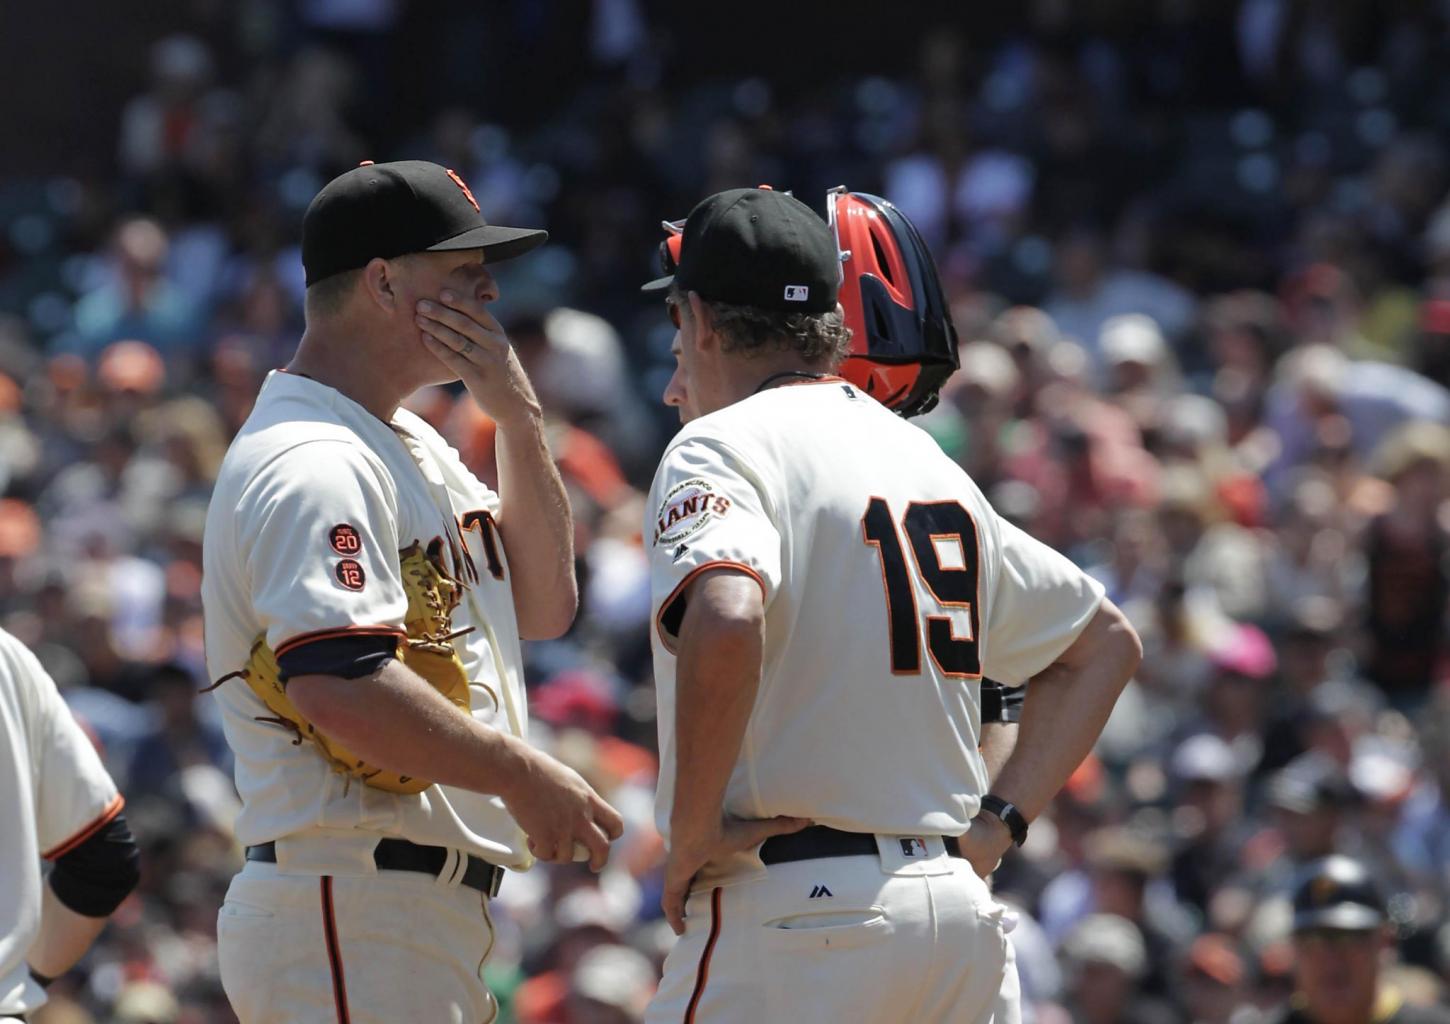 Giants place Cain on DL with back injury, plus Bumgarner  's Cy Young hopes, lineup